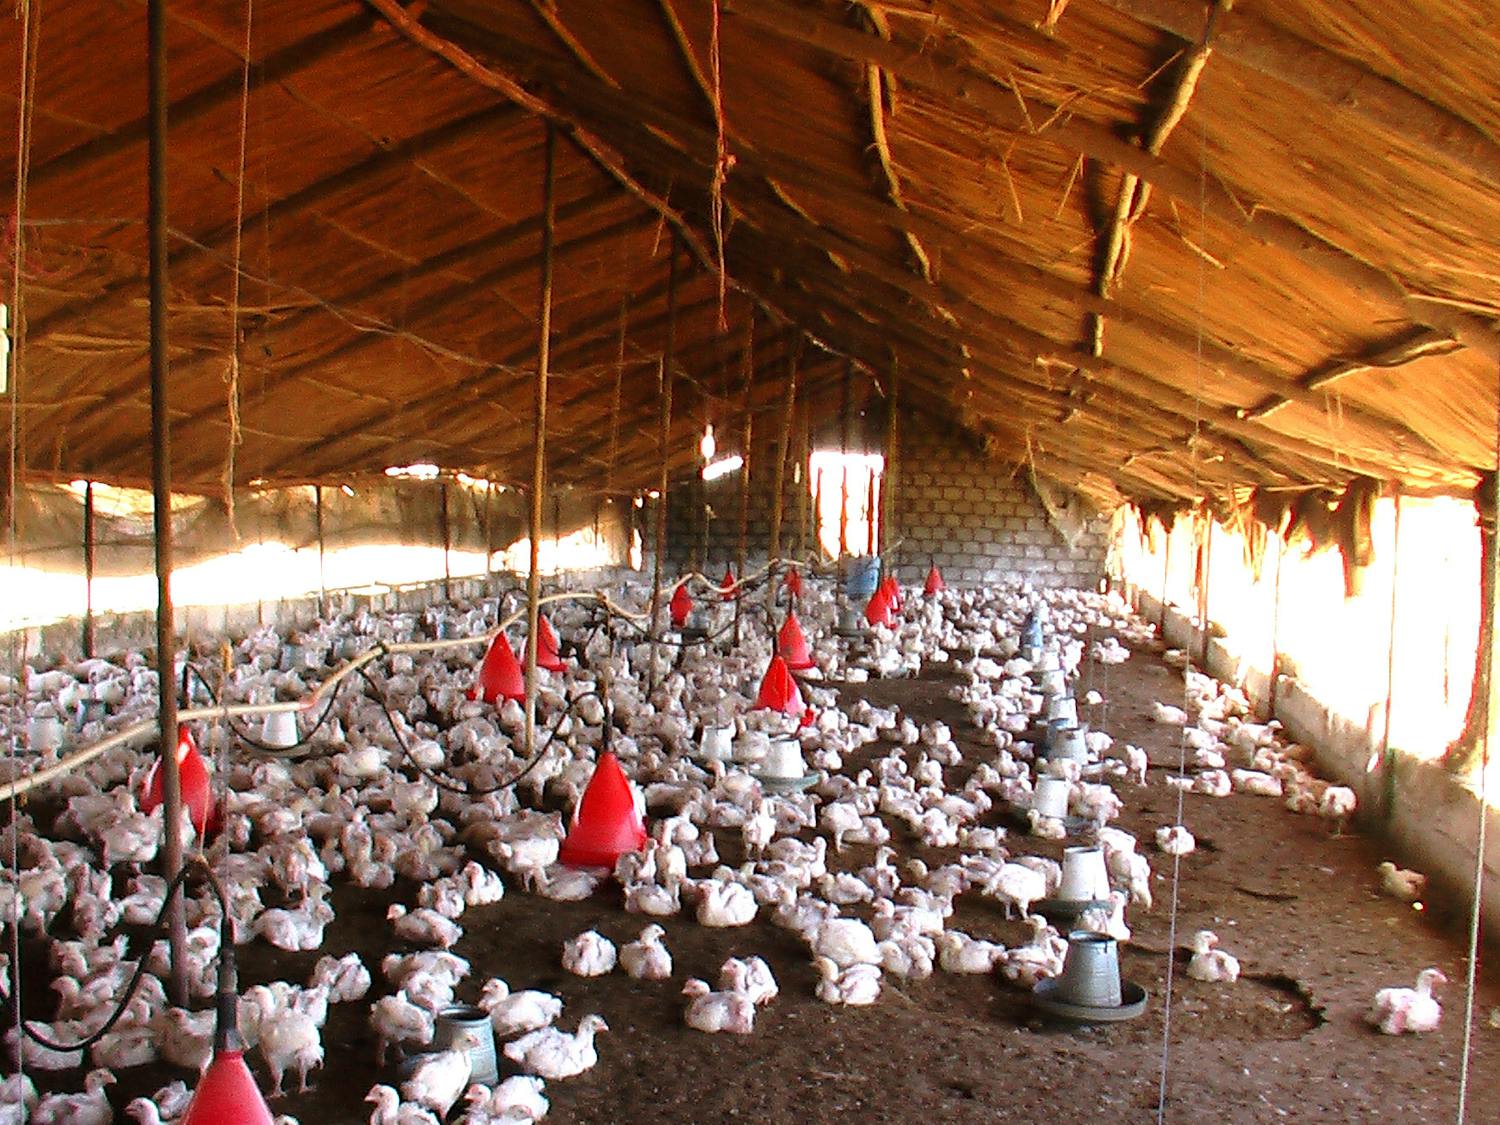 With the rise of the avian flu, a new pandemic could be upon us - and eggs might be at risk (Photo courtesy of Flickr/“Bird Flu shop” by Kashif Mardani. March 27, 2006). 